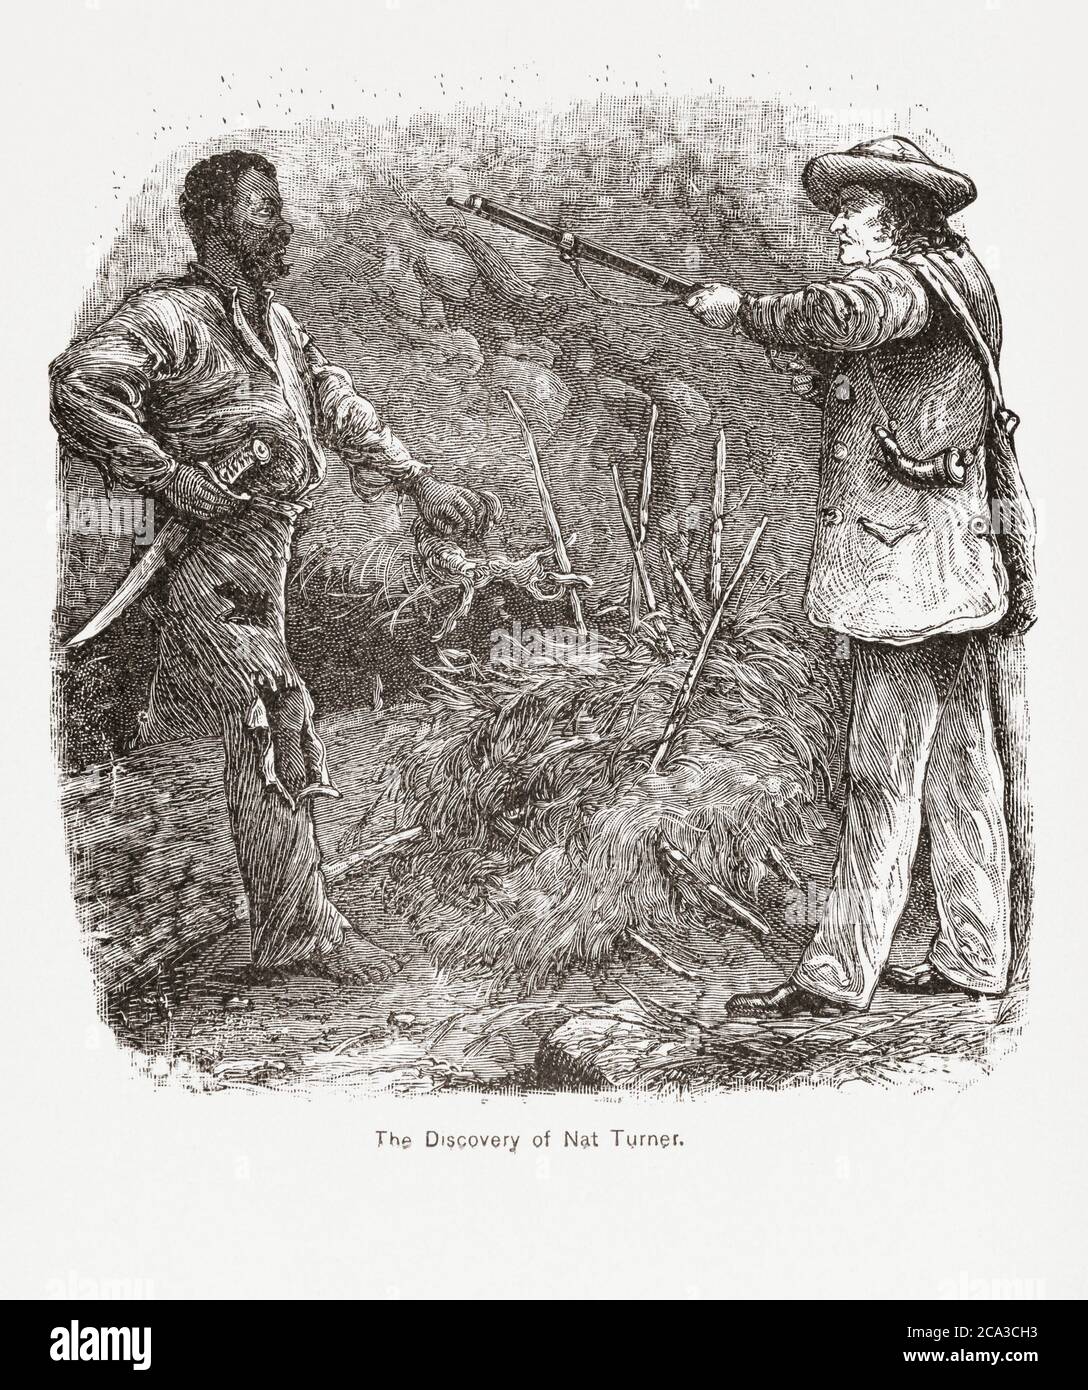 The capture of Nat Turner. Nat Turner, 1800 - 1831, was an African-American born into slavery who instigated a rebellion against white slaveholders. Stock Photo